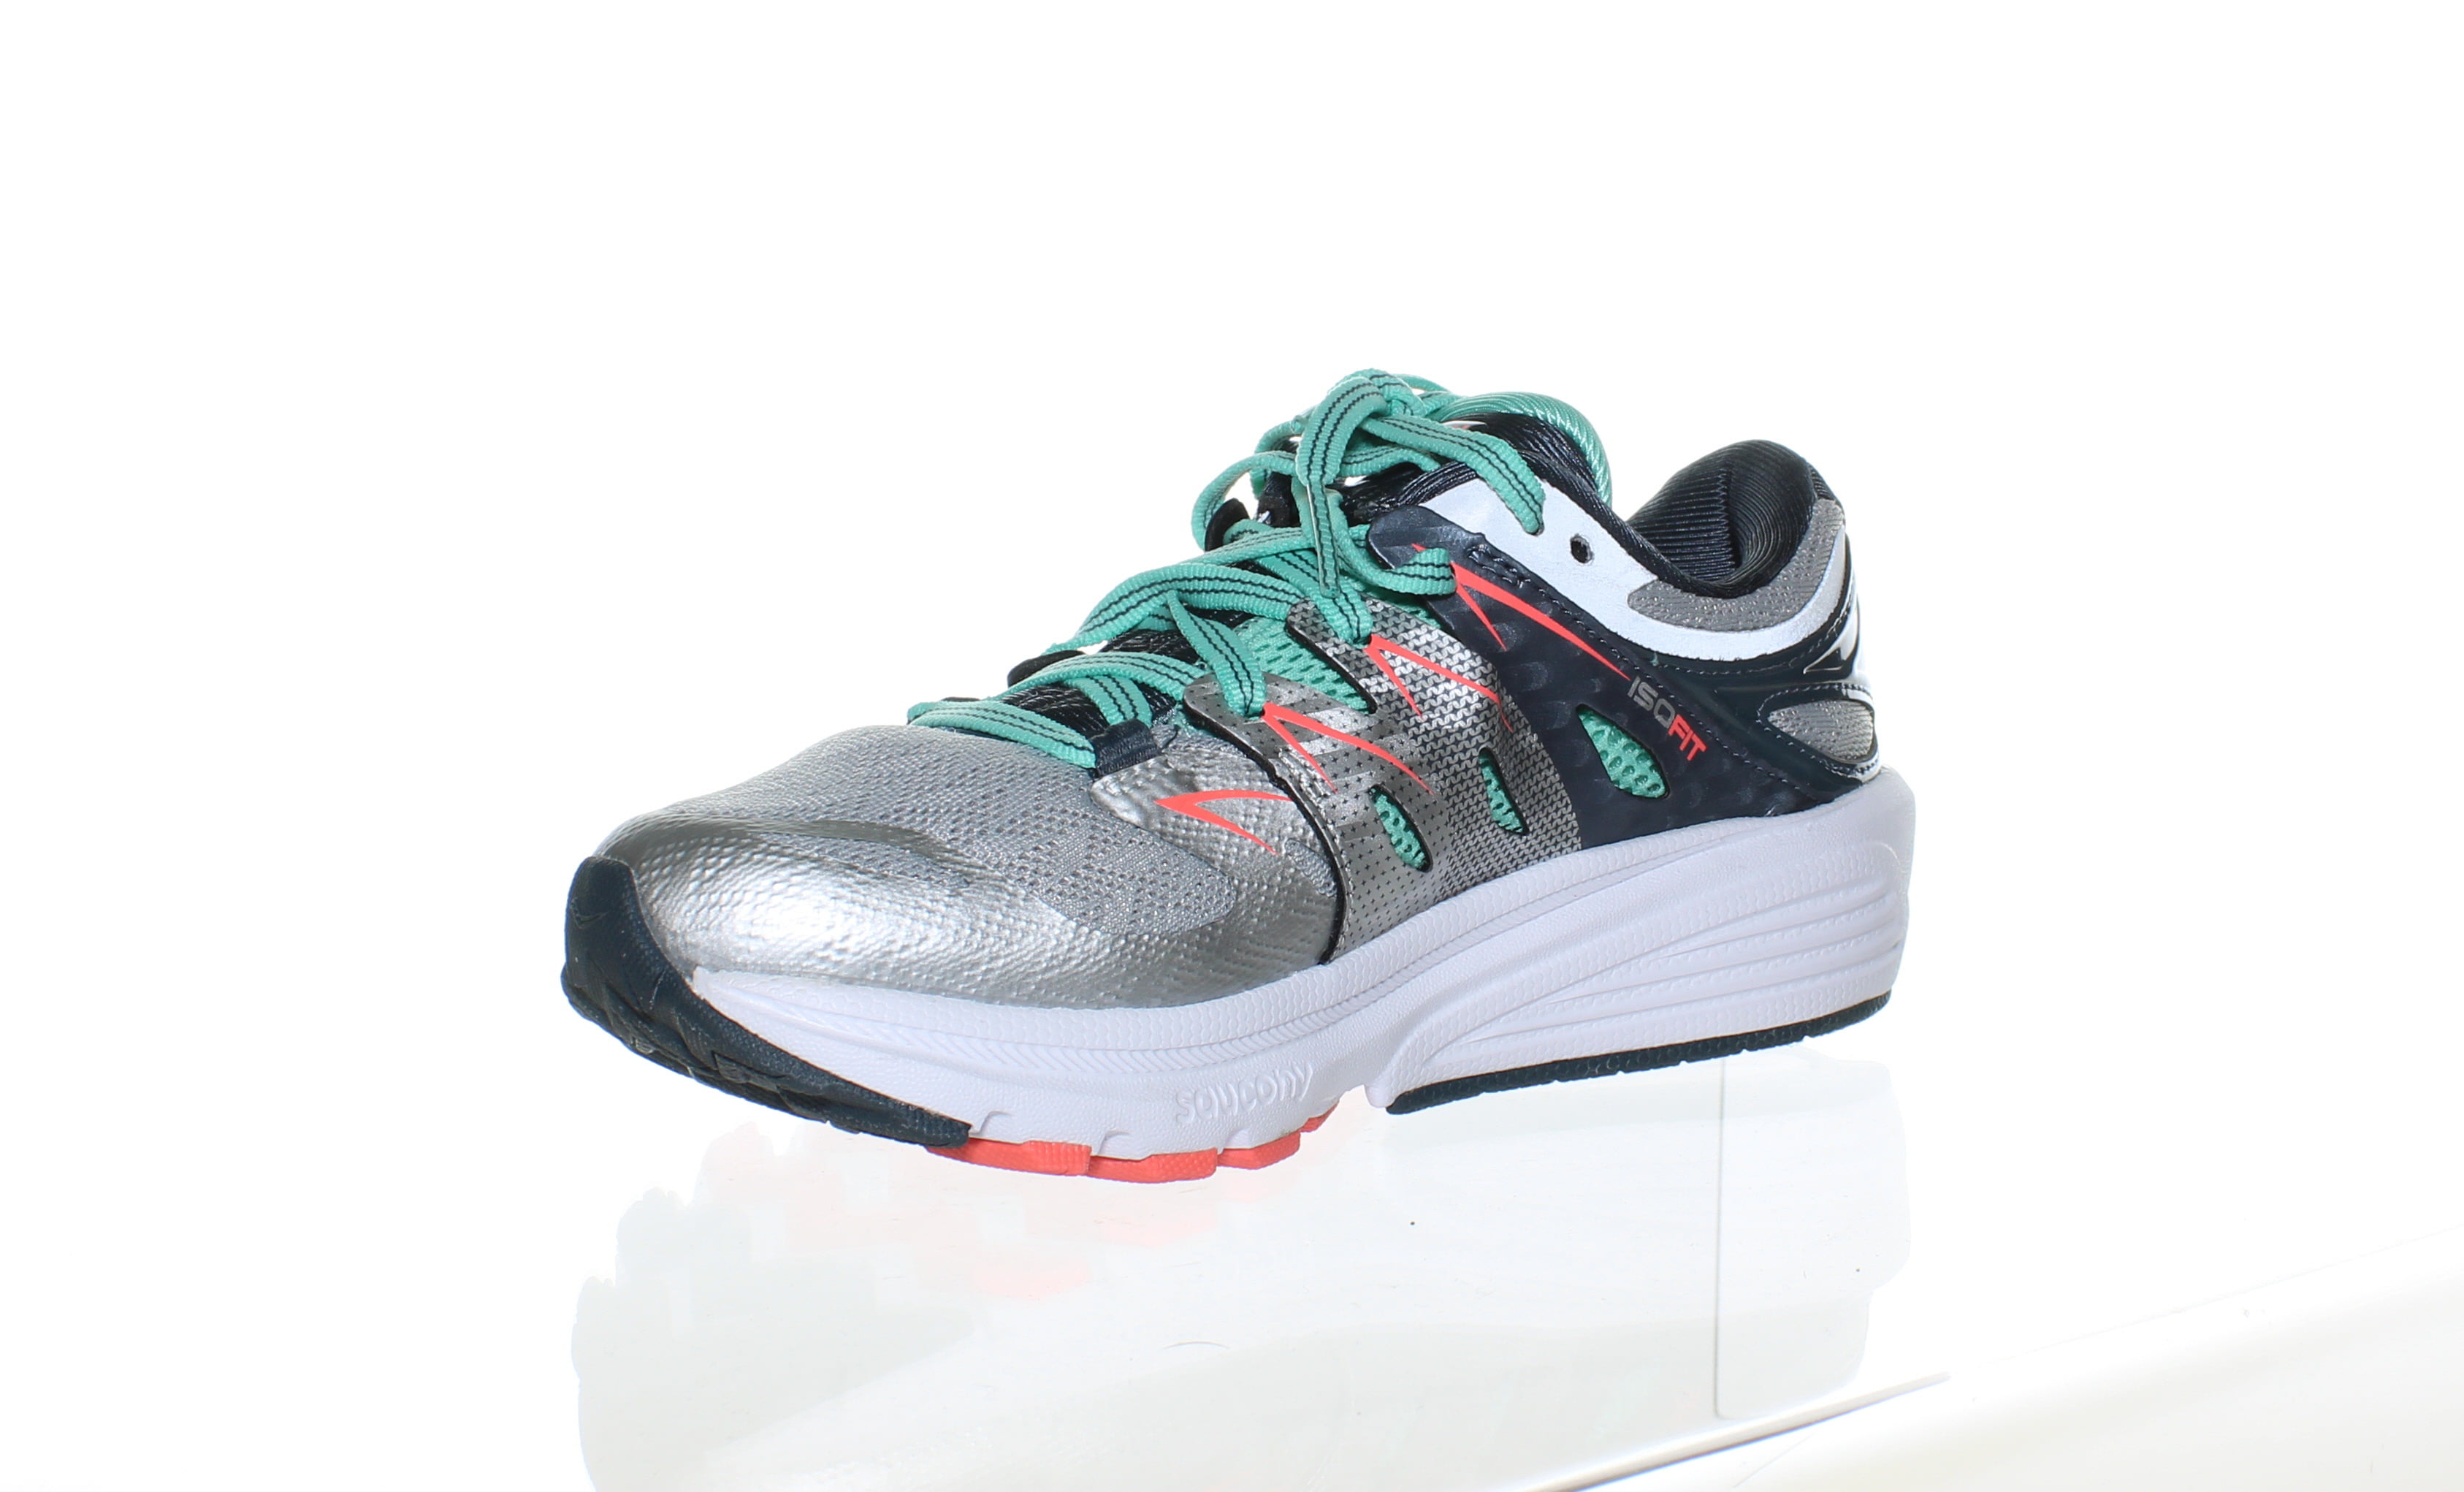 saucony zealot iso 2 womens shoes silvermintcoral